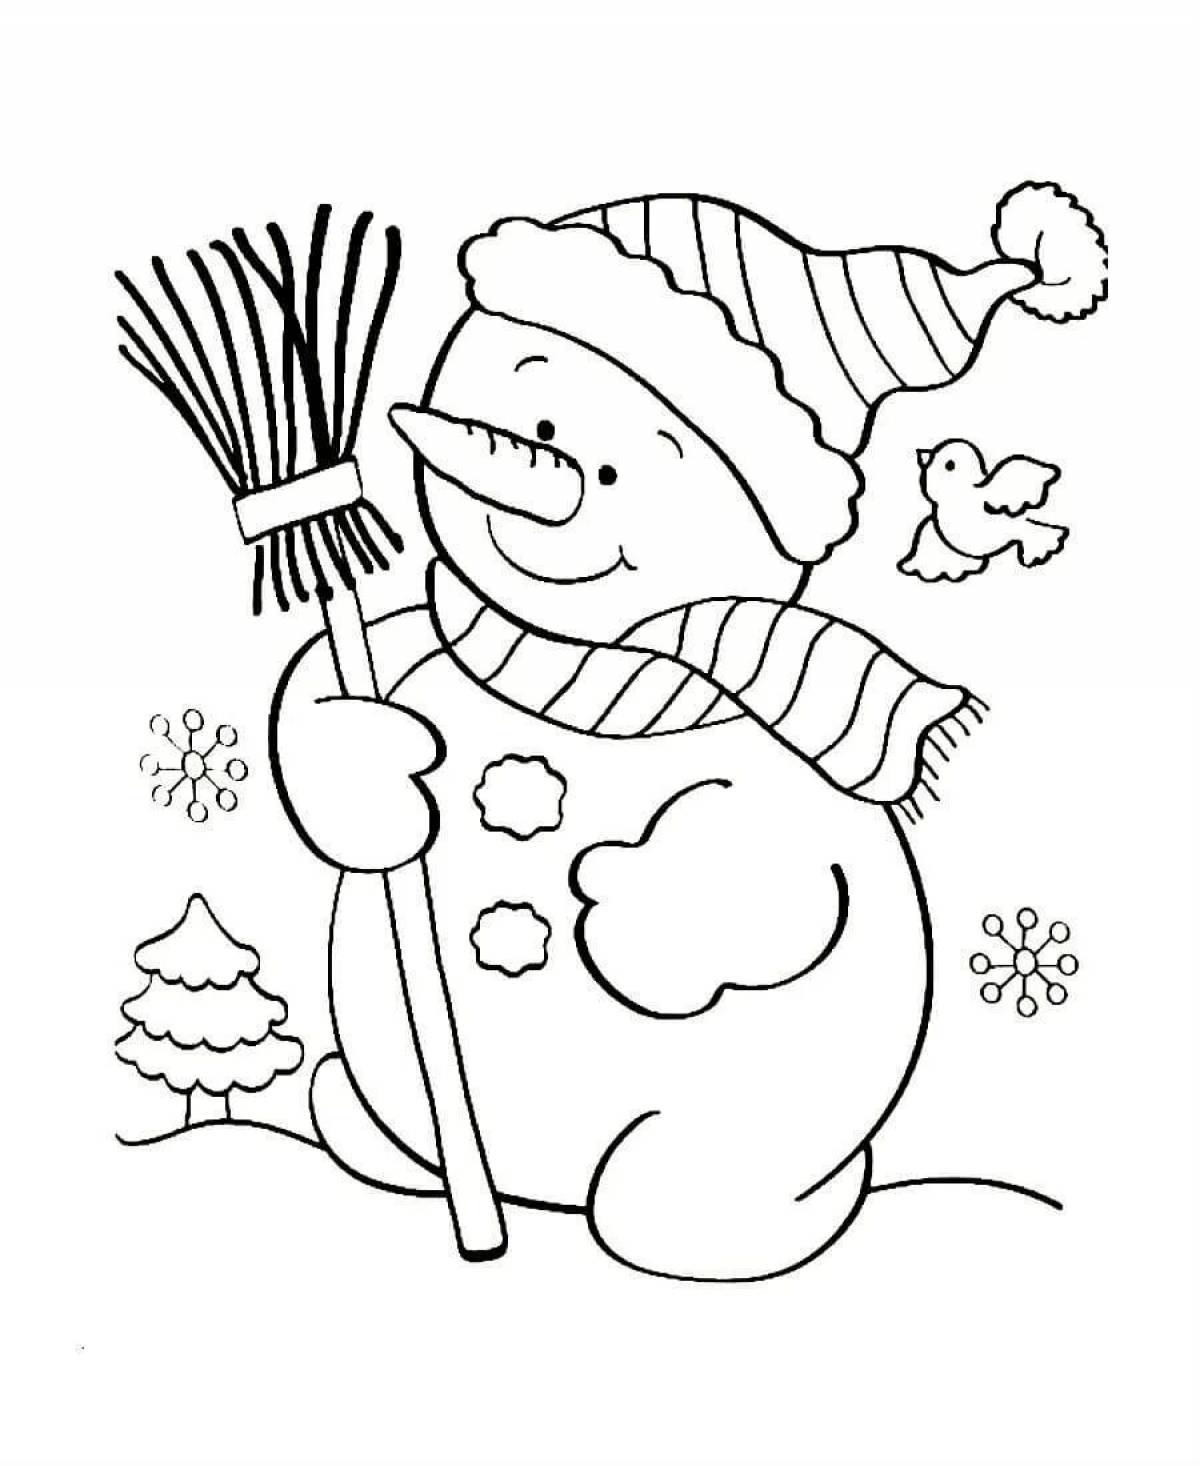 Friendly Christmas snowman coloring book